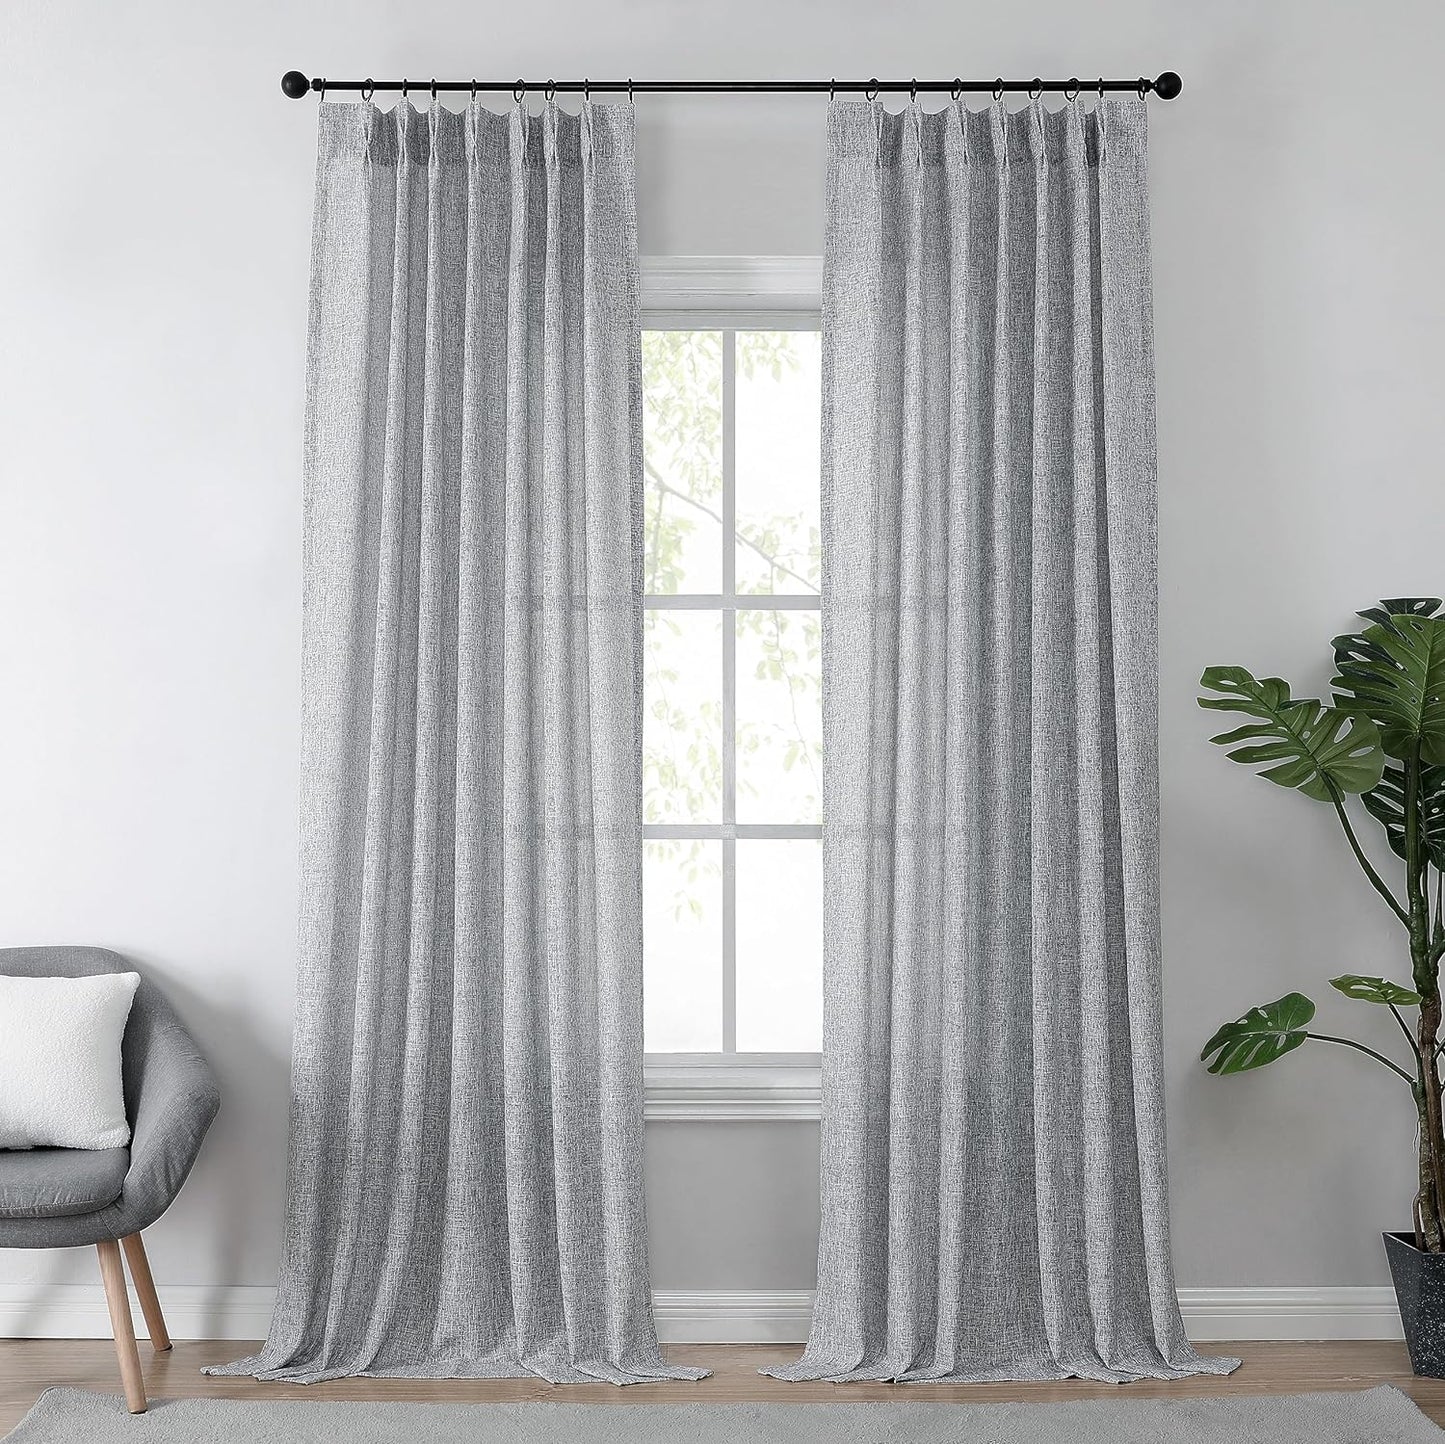 Central Park White Pinch Pleat Sheer Curtain 108 Inches Extra Long Textured Farmhouse Window Treatment Drapery Sets for Living Room Bedroom, 40"X108"X2  Central Park Dark Gray White/Pinch 40"X84"X2 